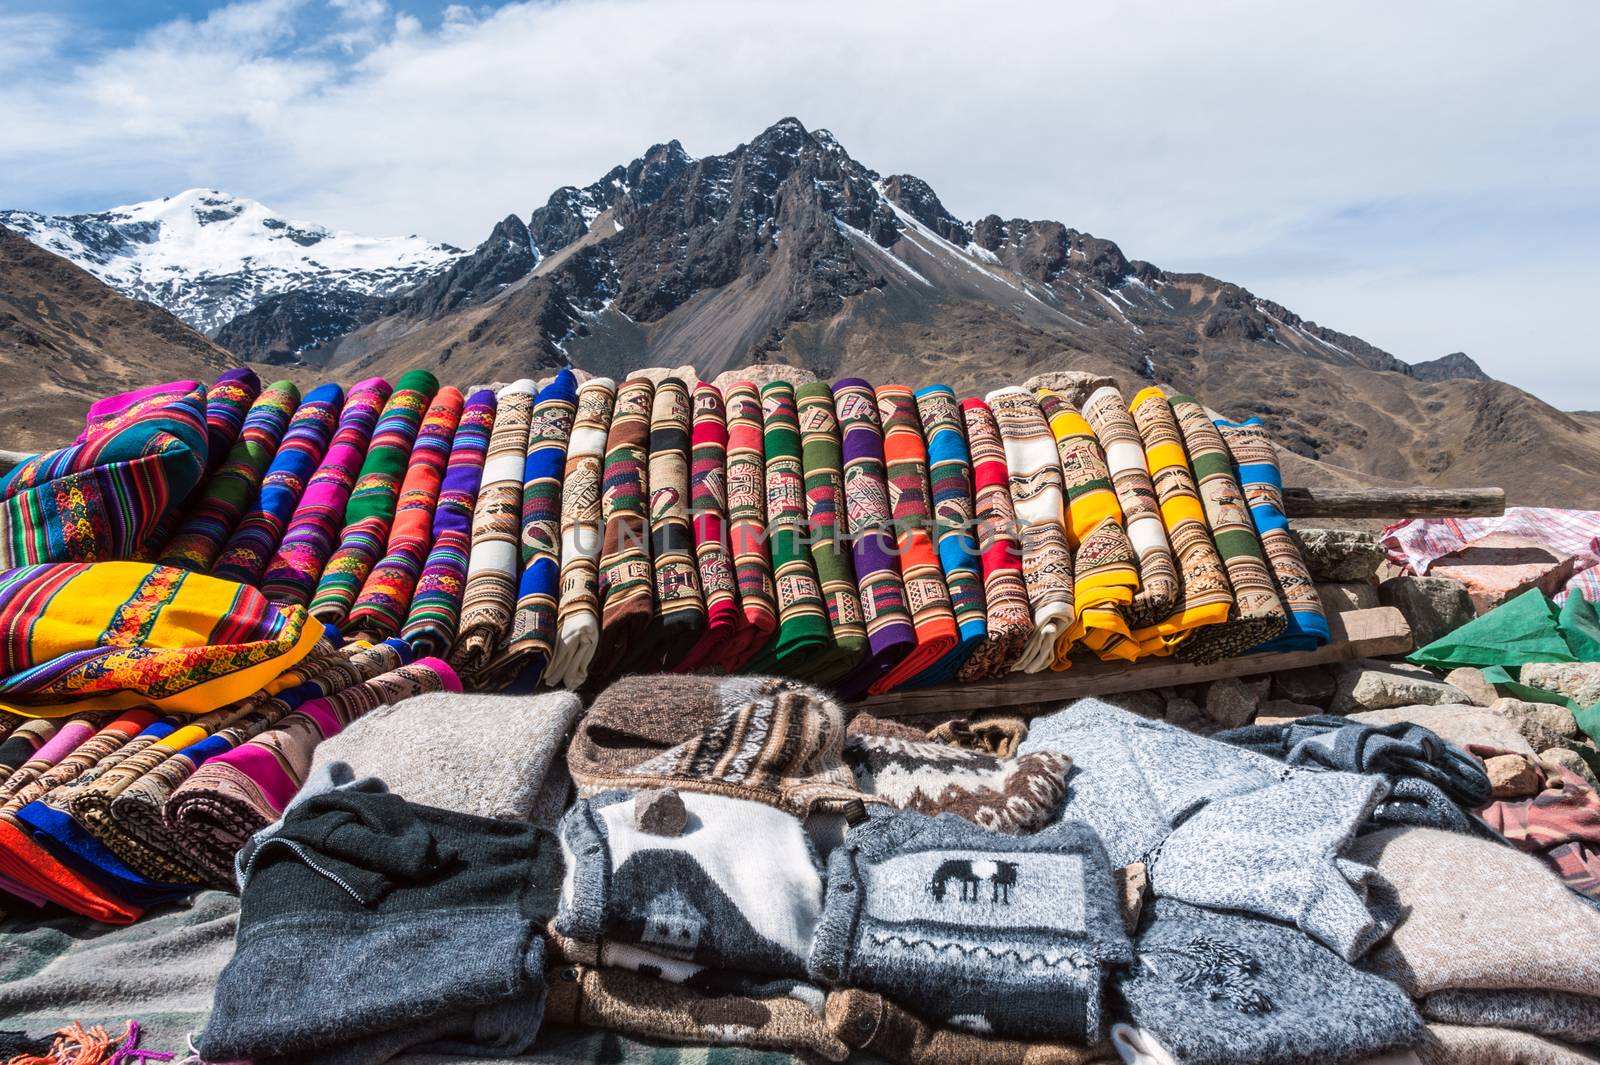 Handicrafts in The Andes of Peru by xura